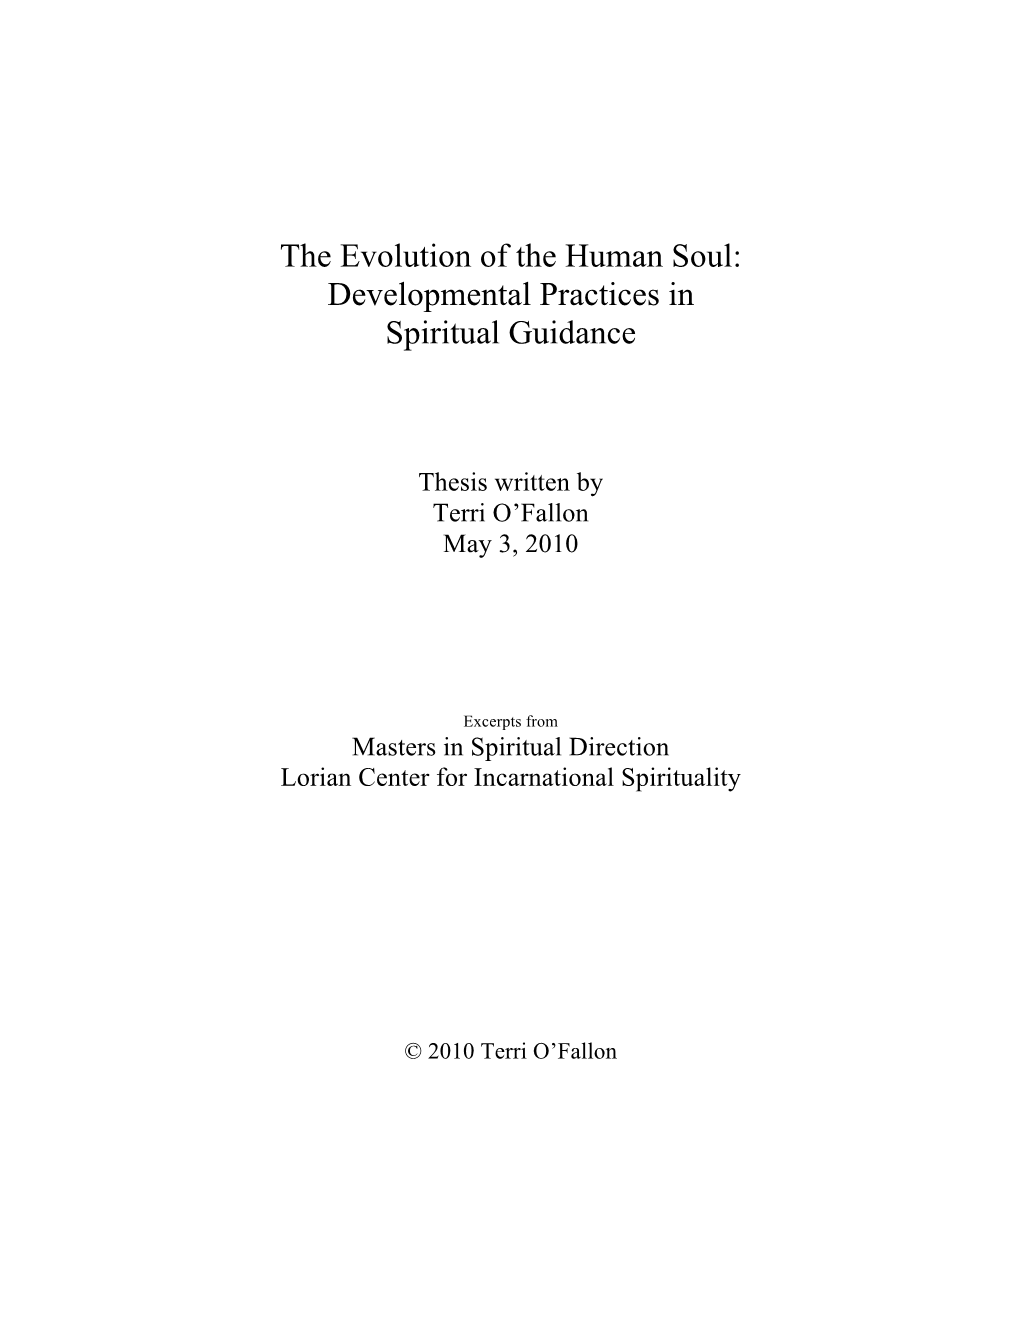 The Evolution of the Human Soul: Developmental Practices in Spiritual Guidance